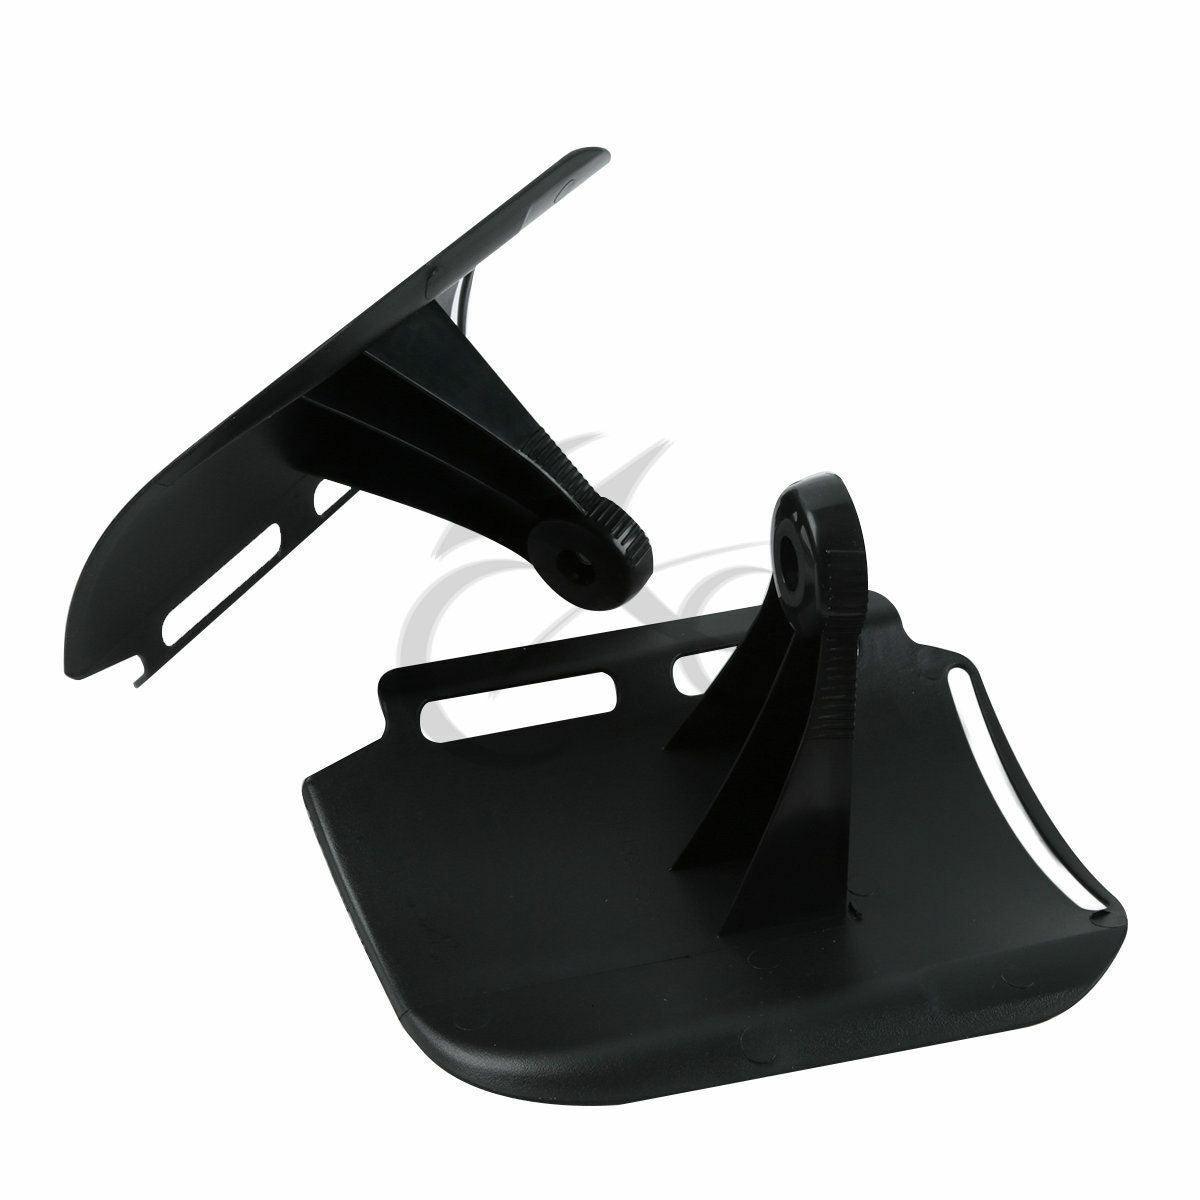 Glossy Black Lower Vented Leg Fairing Fit For Harley Touring Electra Glide 83-13 - Moto Life Products